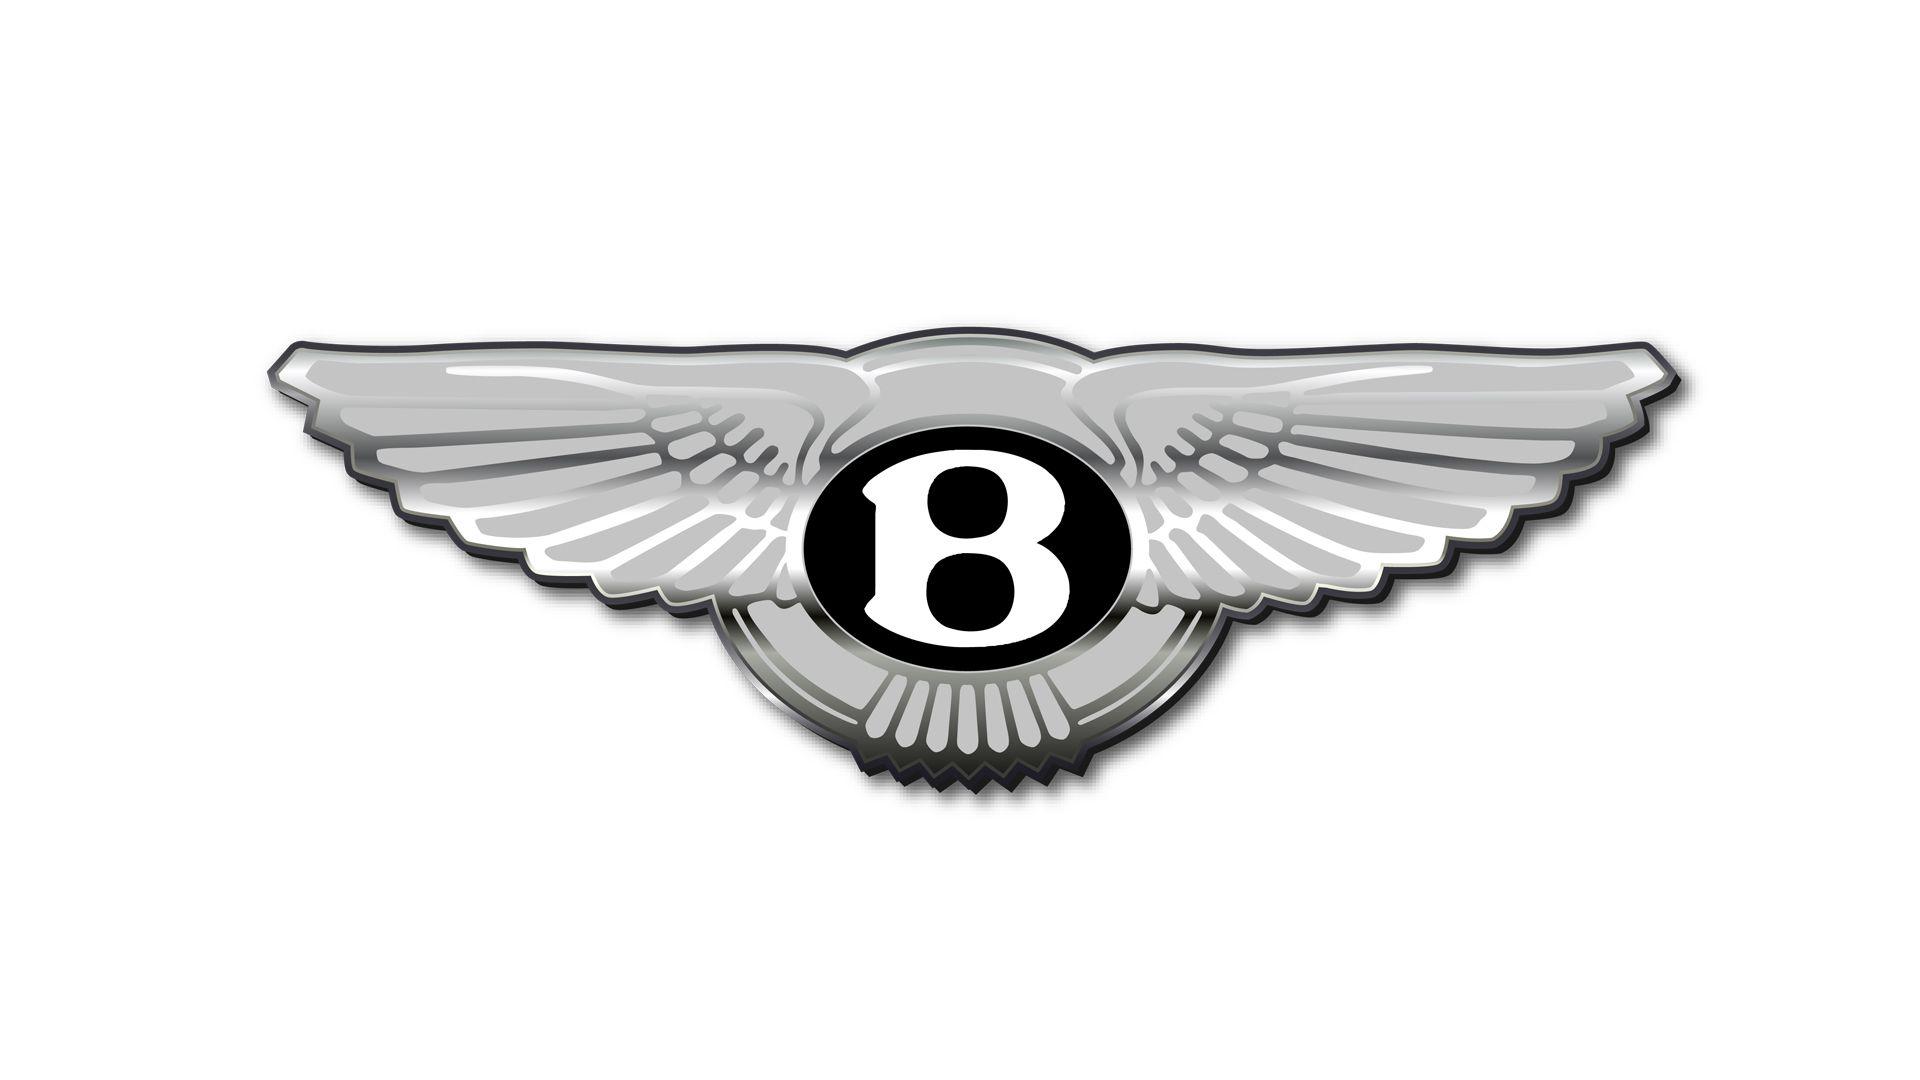 Bentley Logo - Bentley Logo, Bentley Symbol, Meaning, History and Evolution